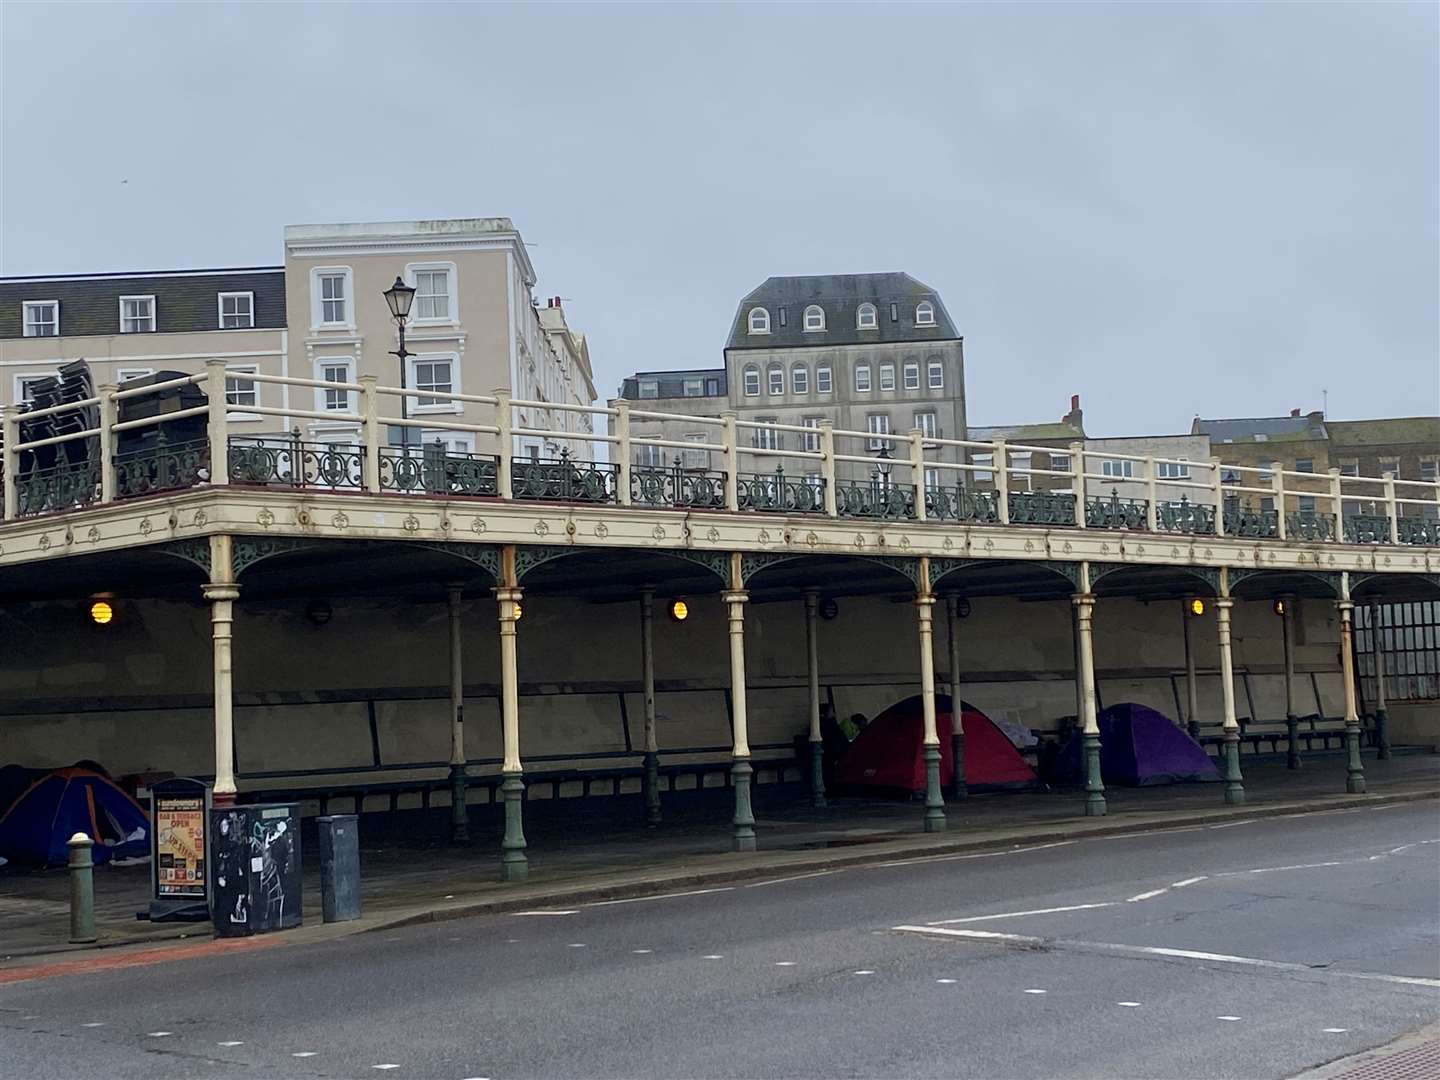 Tents and homeless people continue to remain along Margate seafront